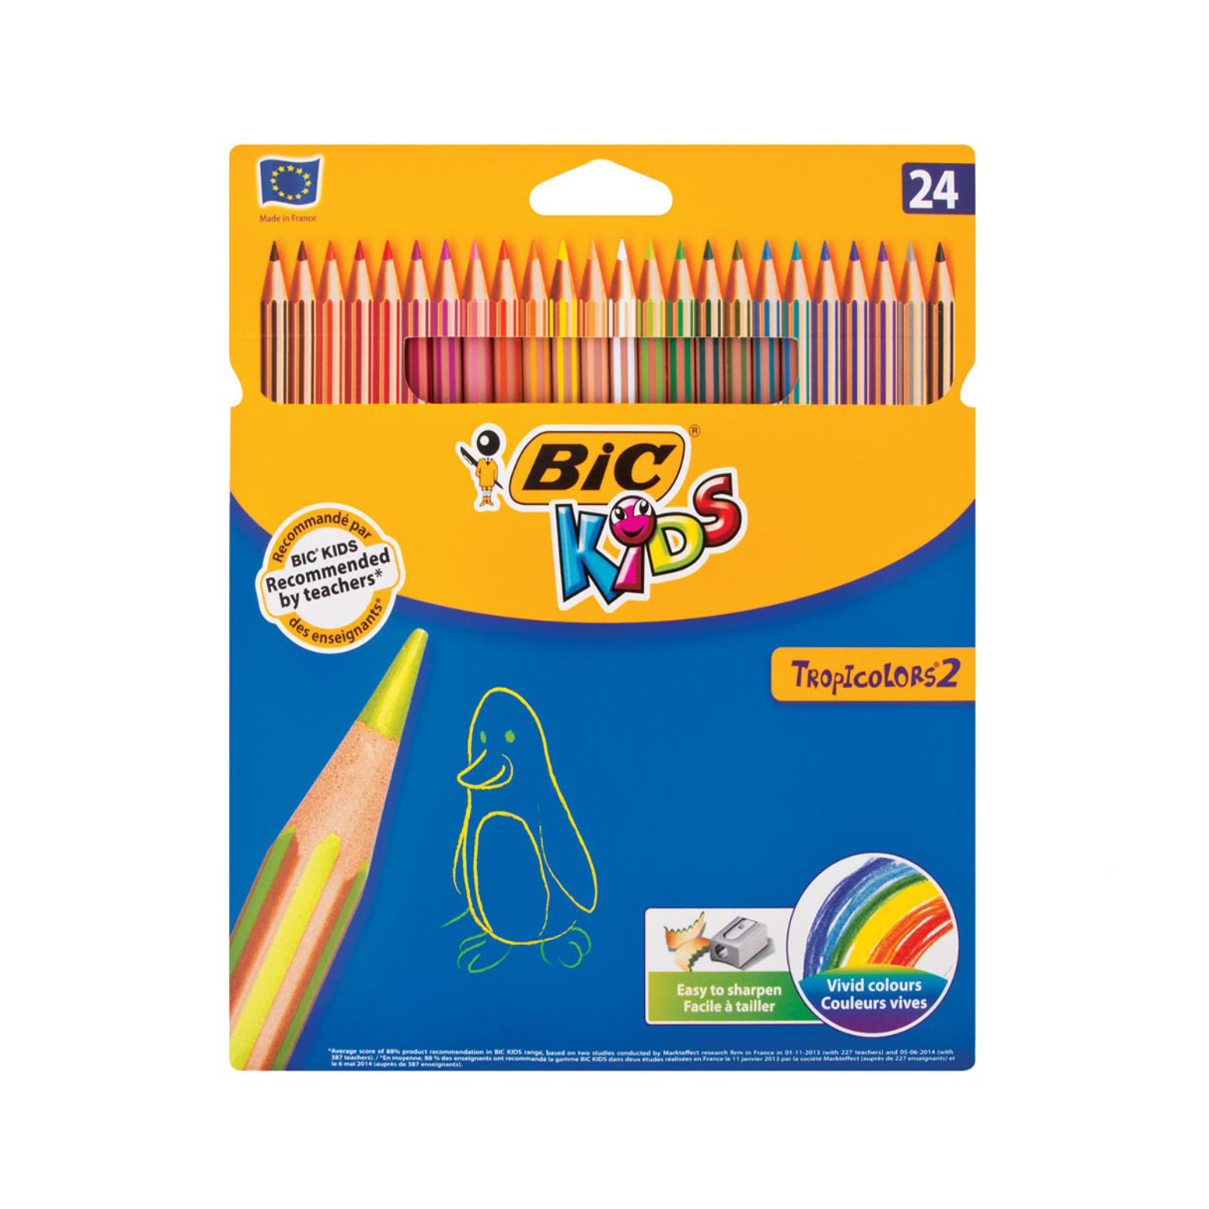 BIC announces their earnings report